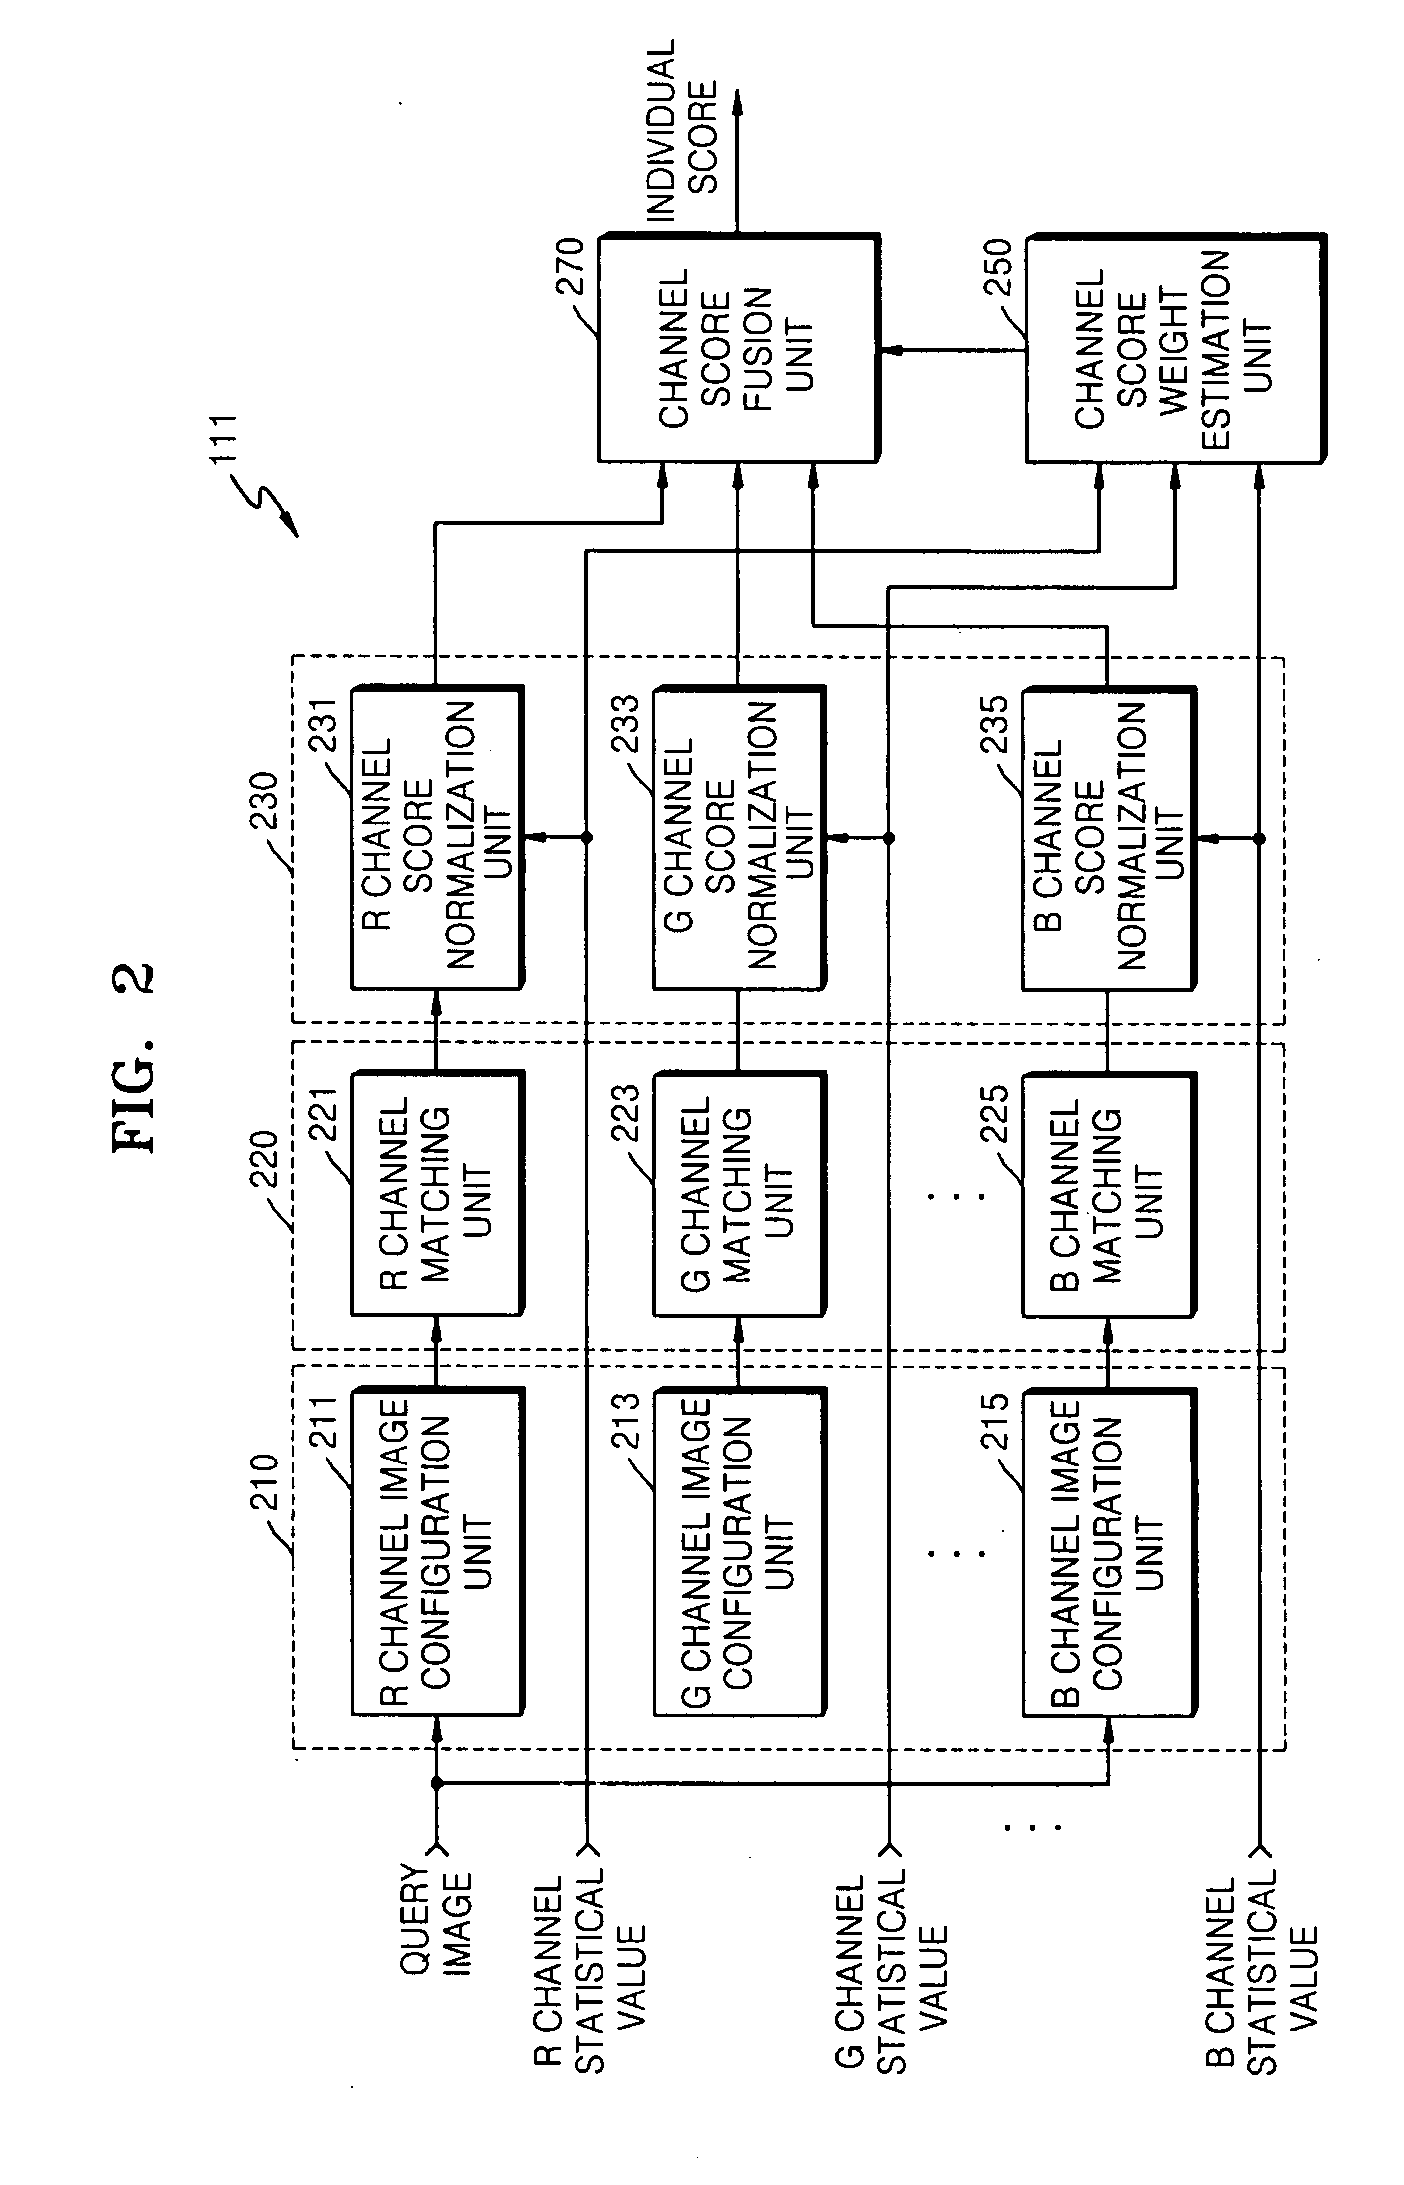 Object verification apparatus and method